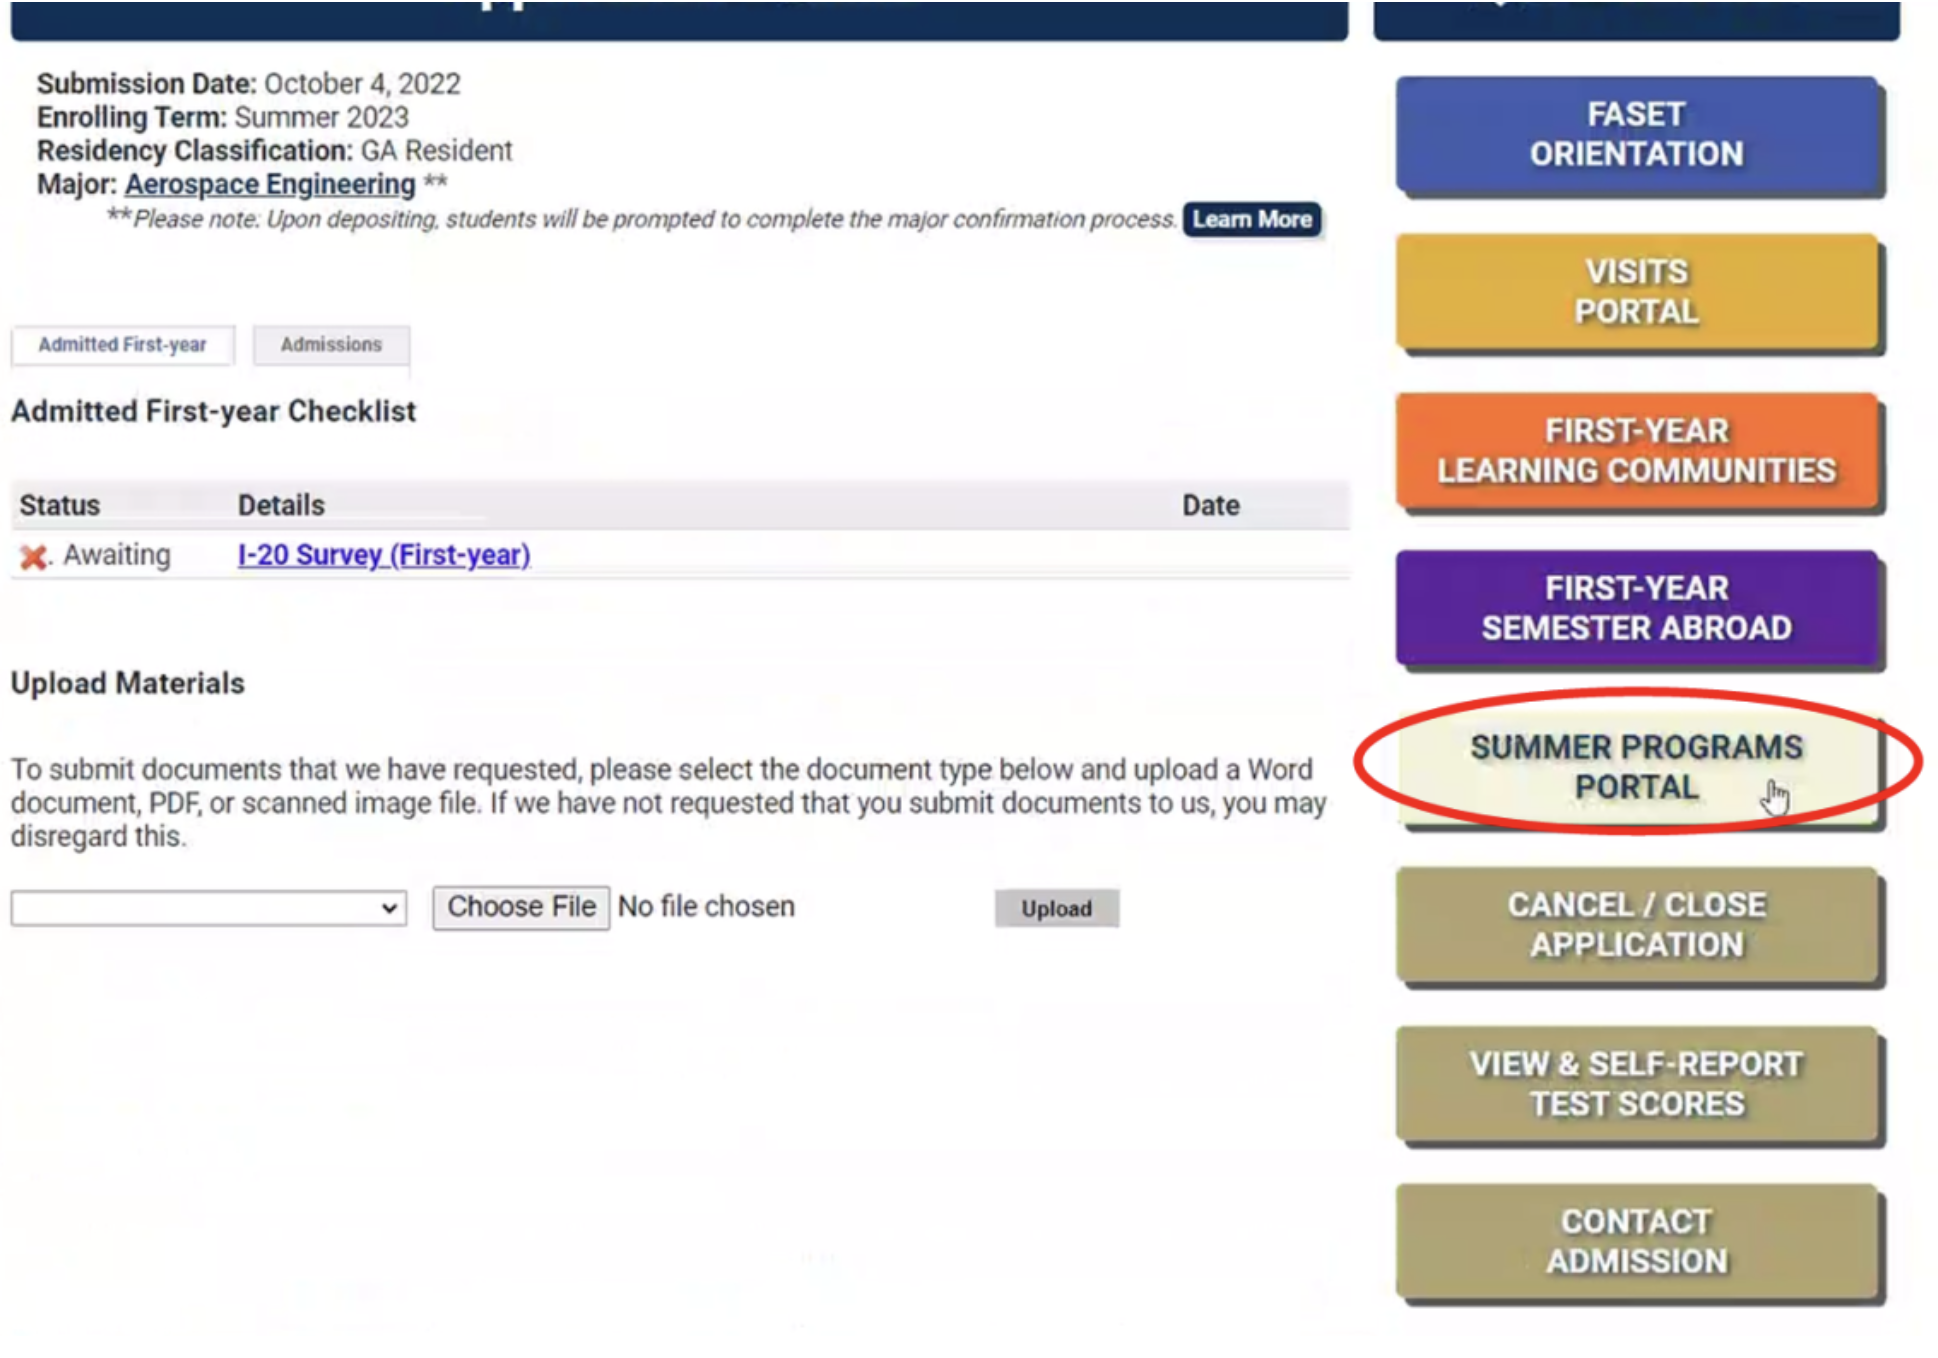 On the admission portal, select "Summer Program Portal" on the right sidebar in the colored boxes.